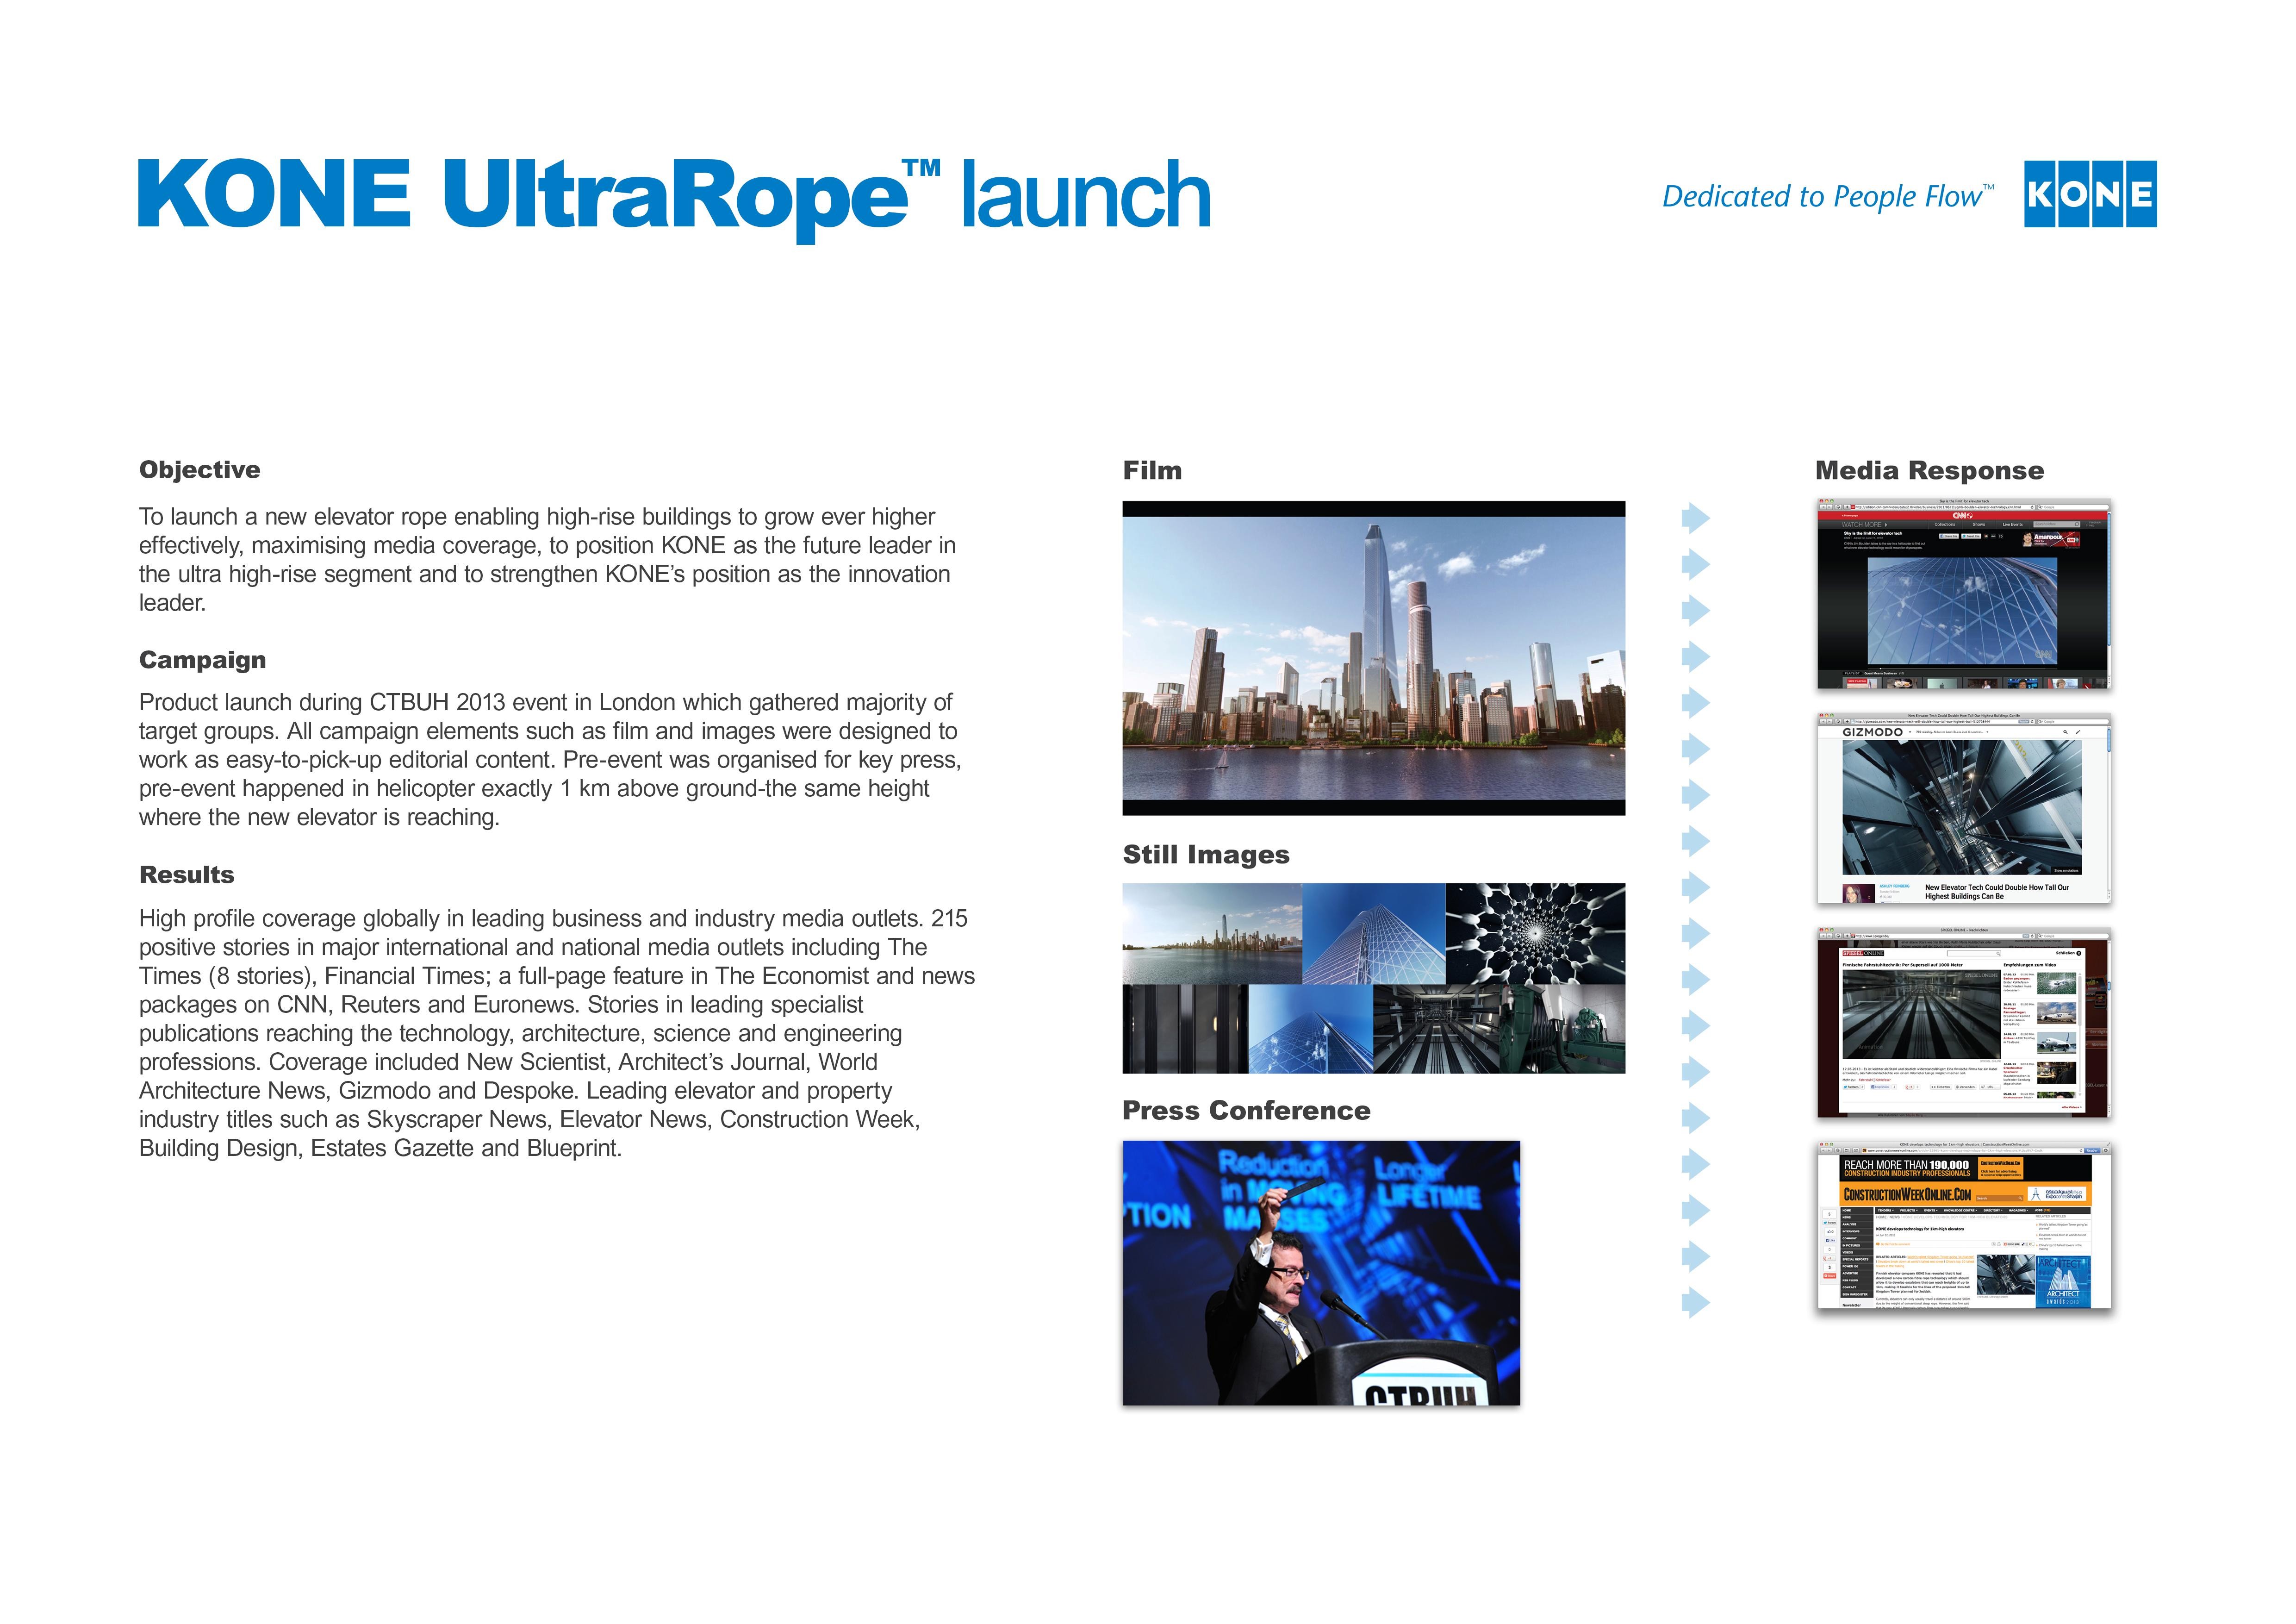 KONE ULTRAROPE PRODUCT LAUNCH CAMPAIGN